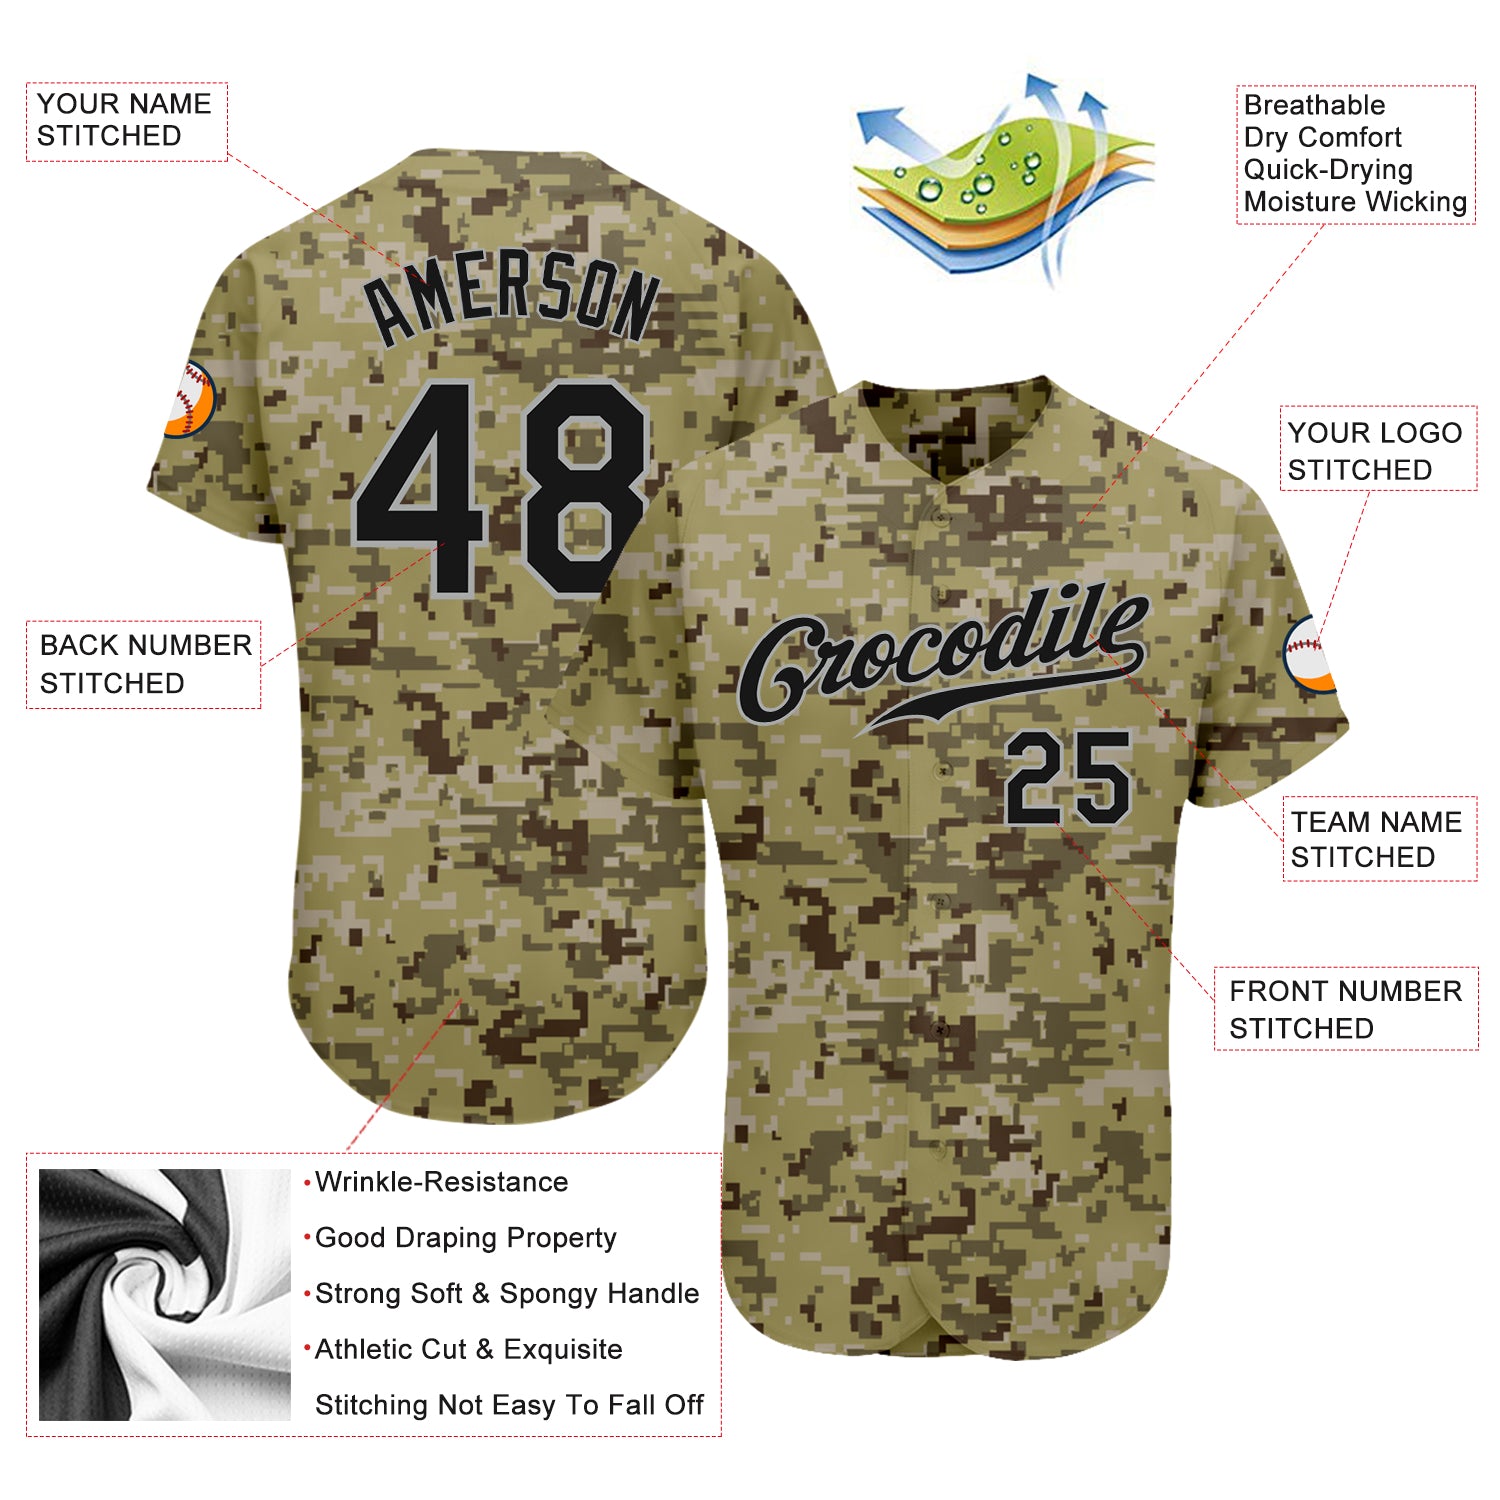 padres camo jersey for sale